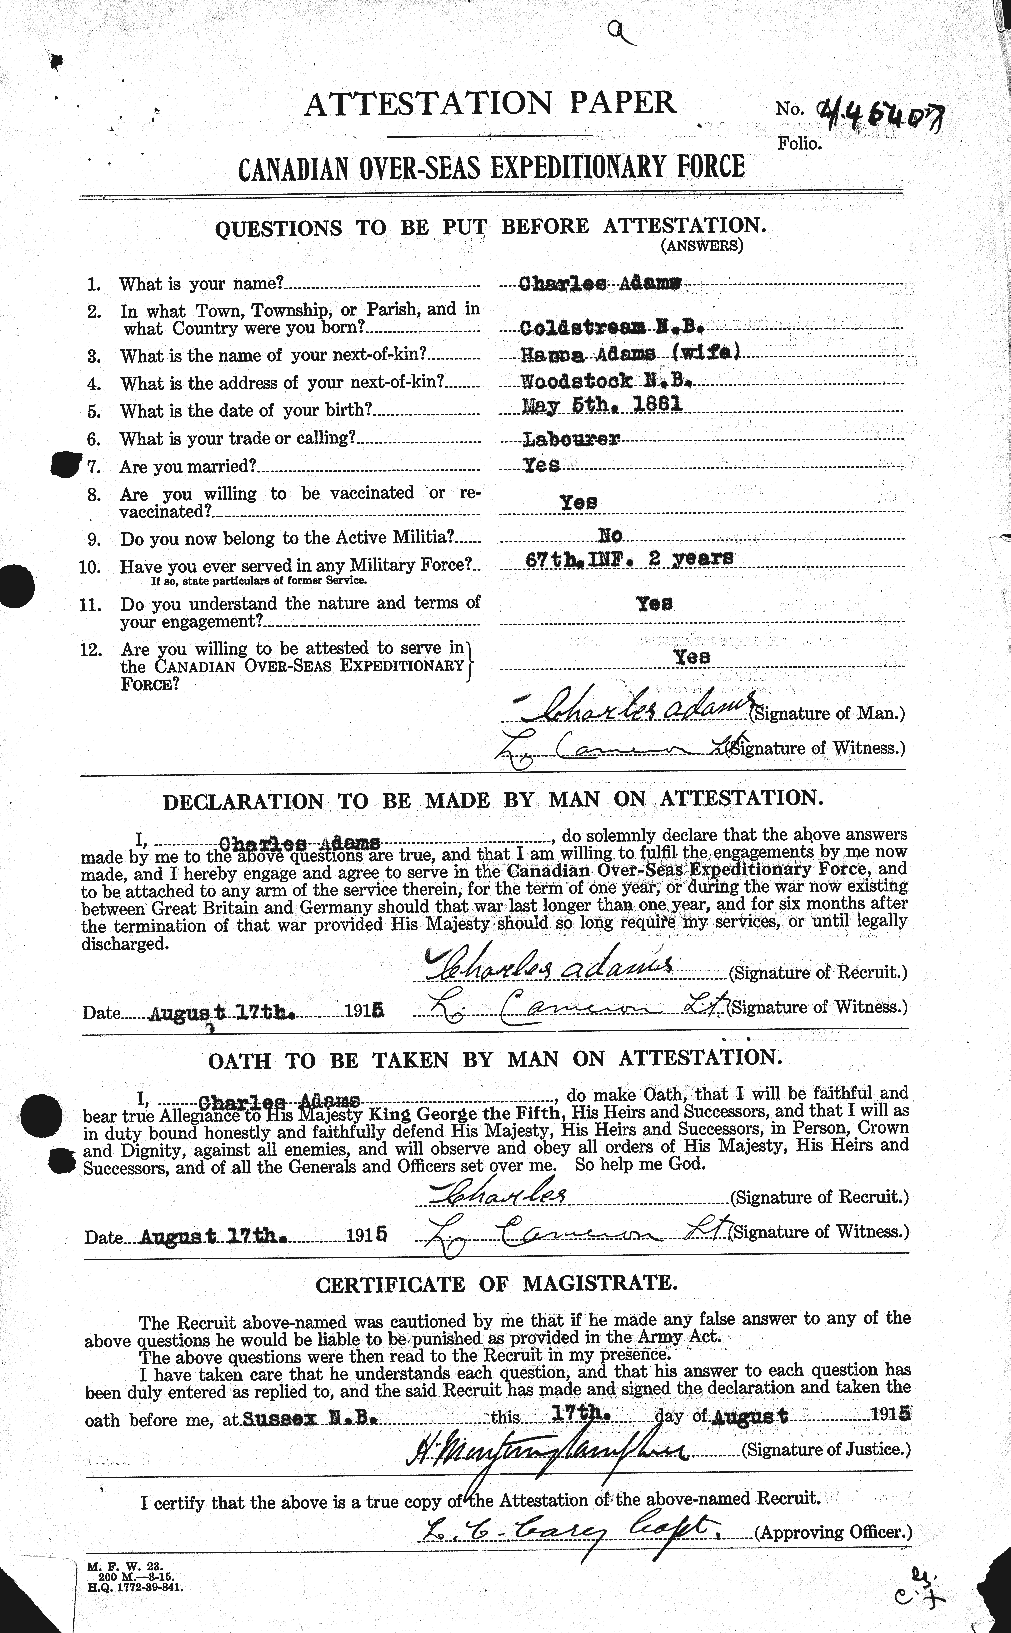 Personnel Records of the First World War - CEF 202049a